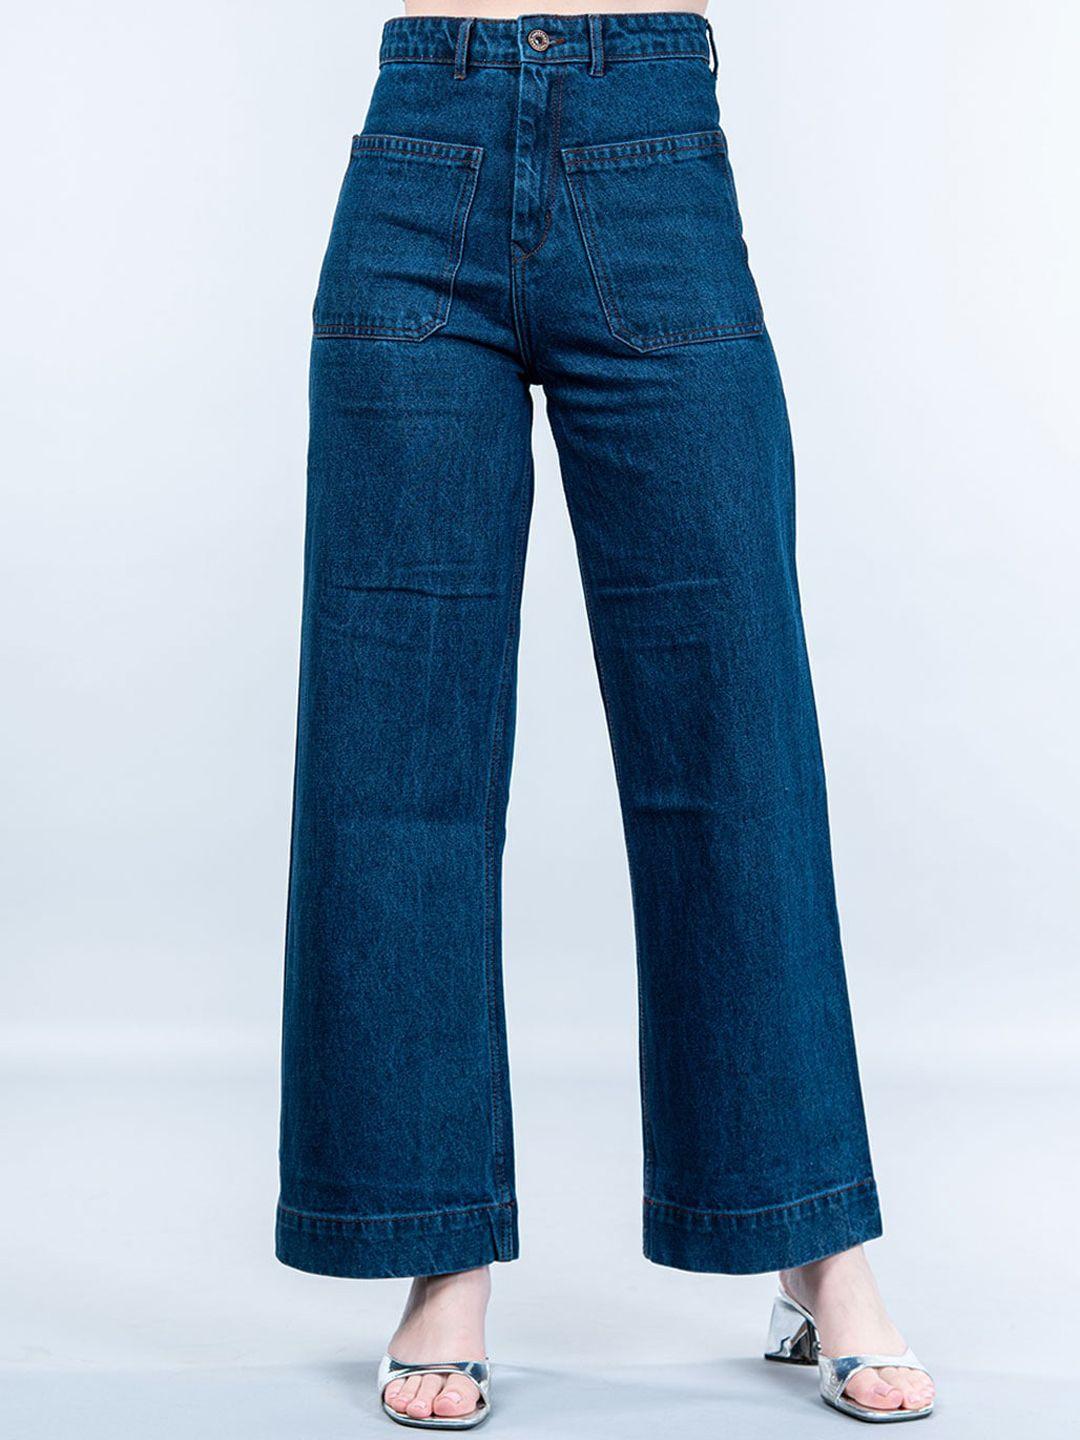 tistabene-women-comfort-clean-look-mid-rise-stretchable-jeans